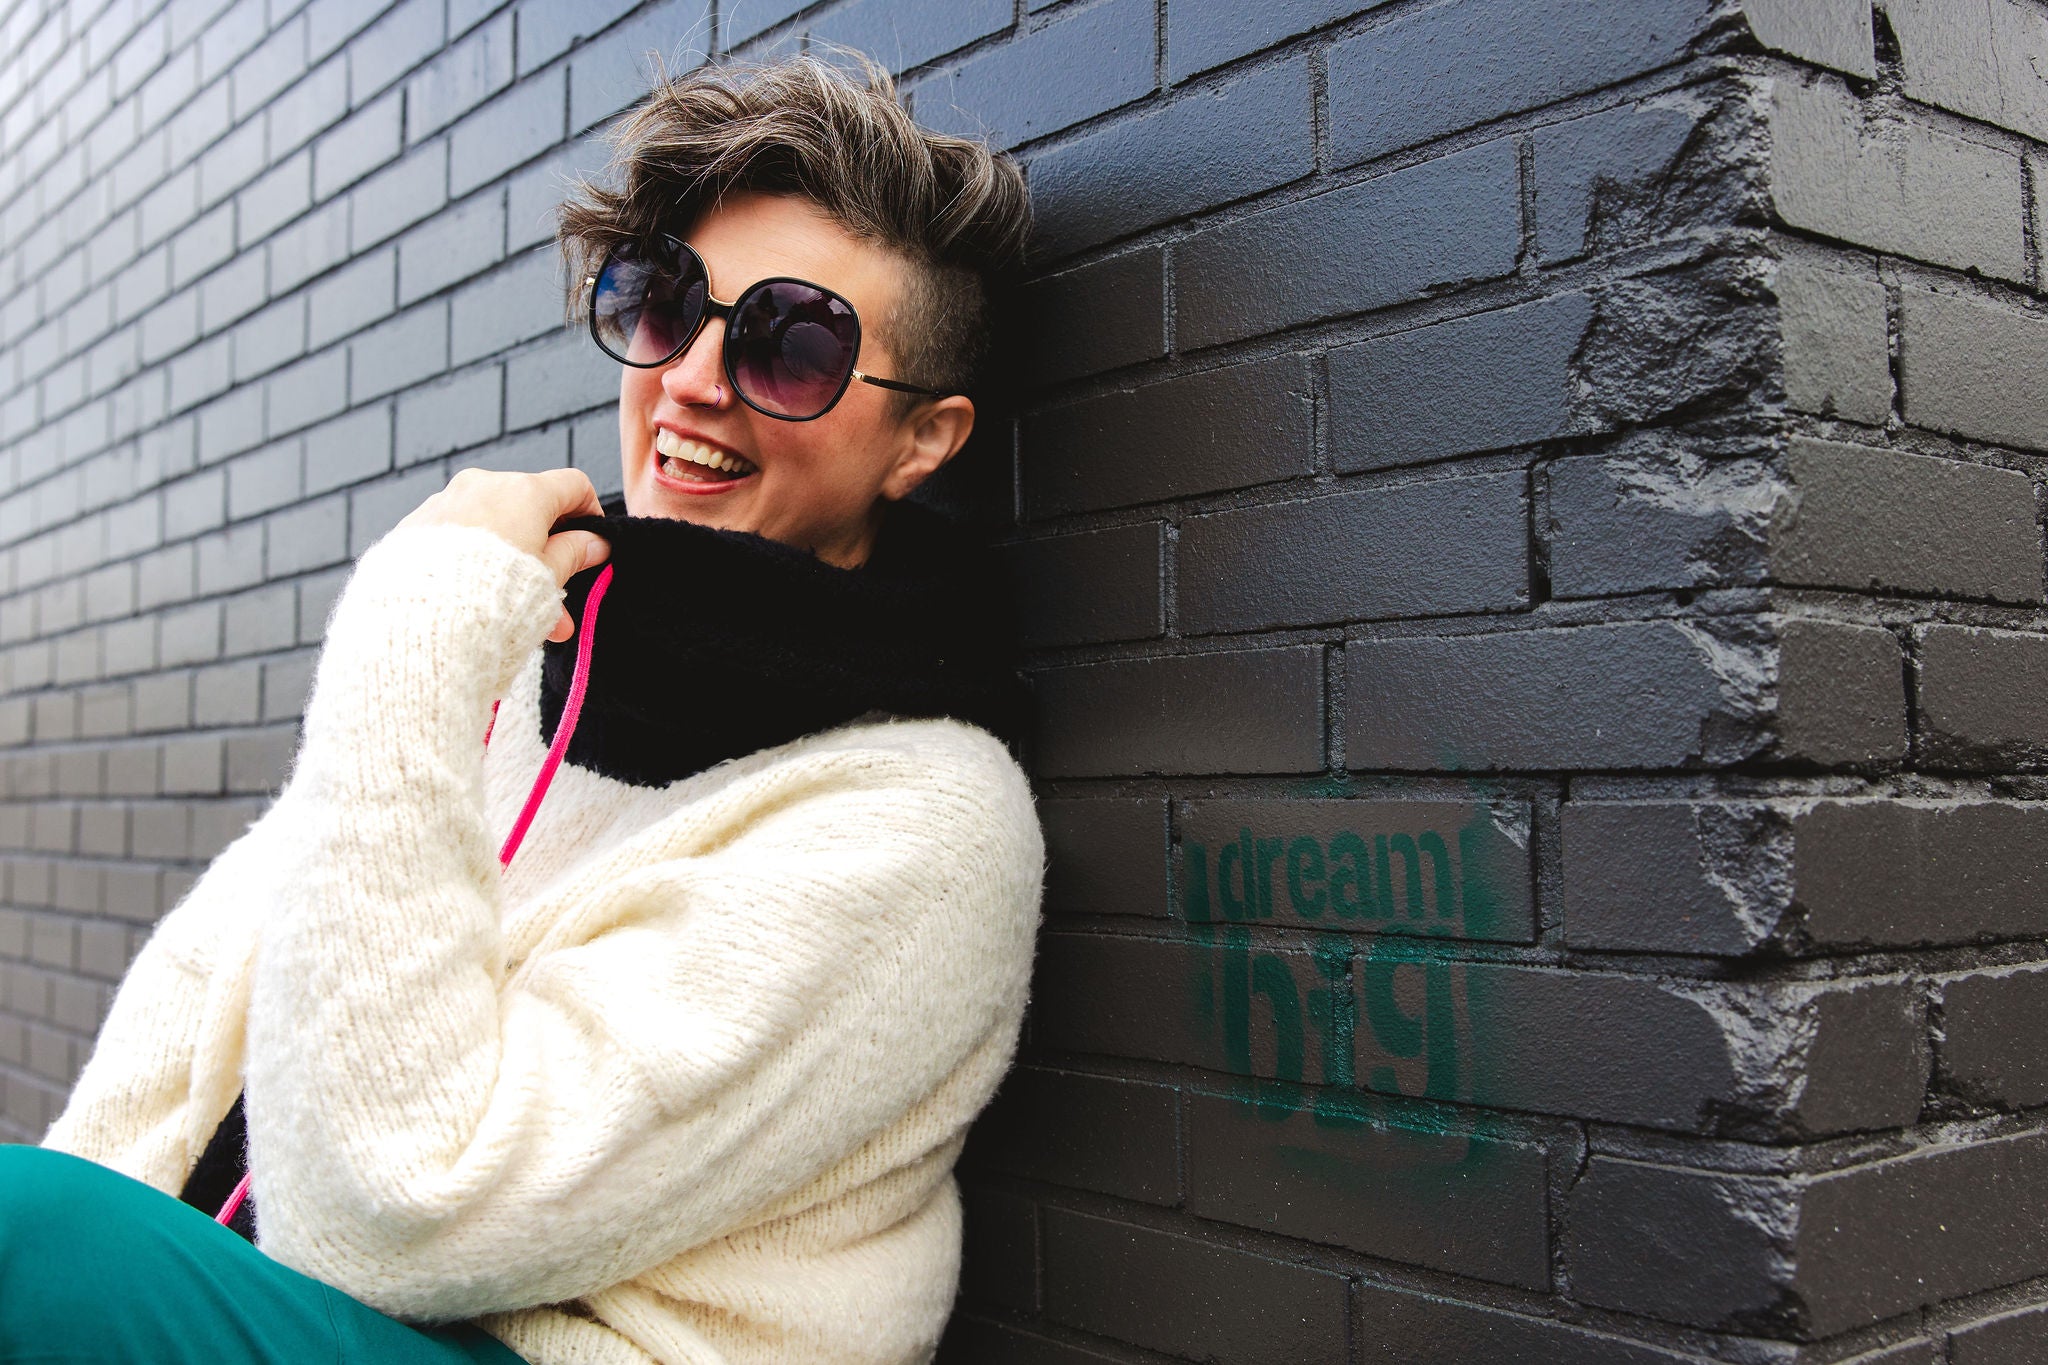 Jen, laughing and leaning against a black brick wall, wears a fluffy knit hoodie. The hoodie is made with white yarn and a contrasting black hood and kangaroo pocket, with neon pink sweater strings.